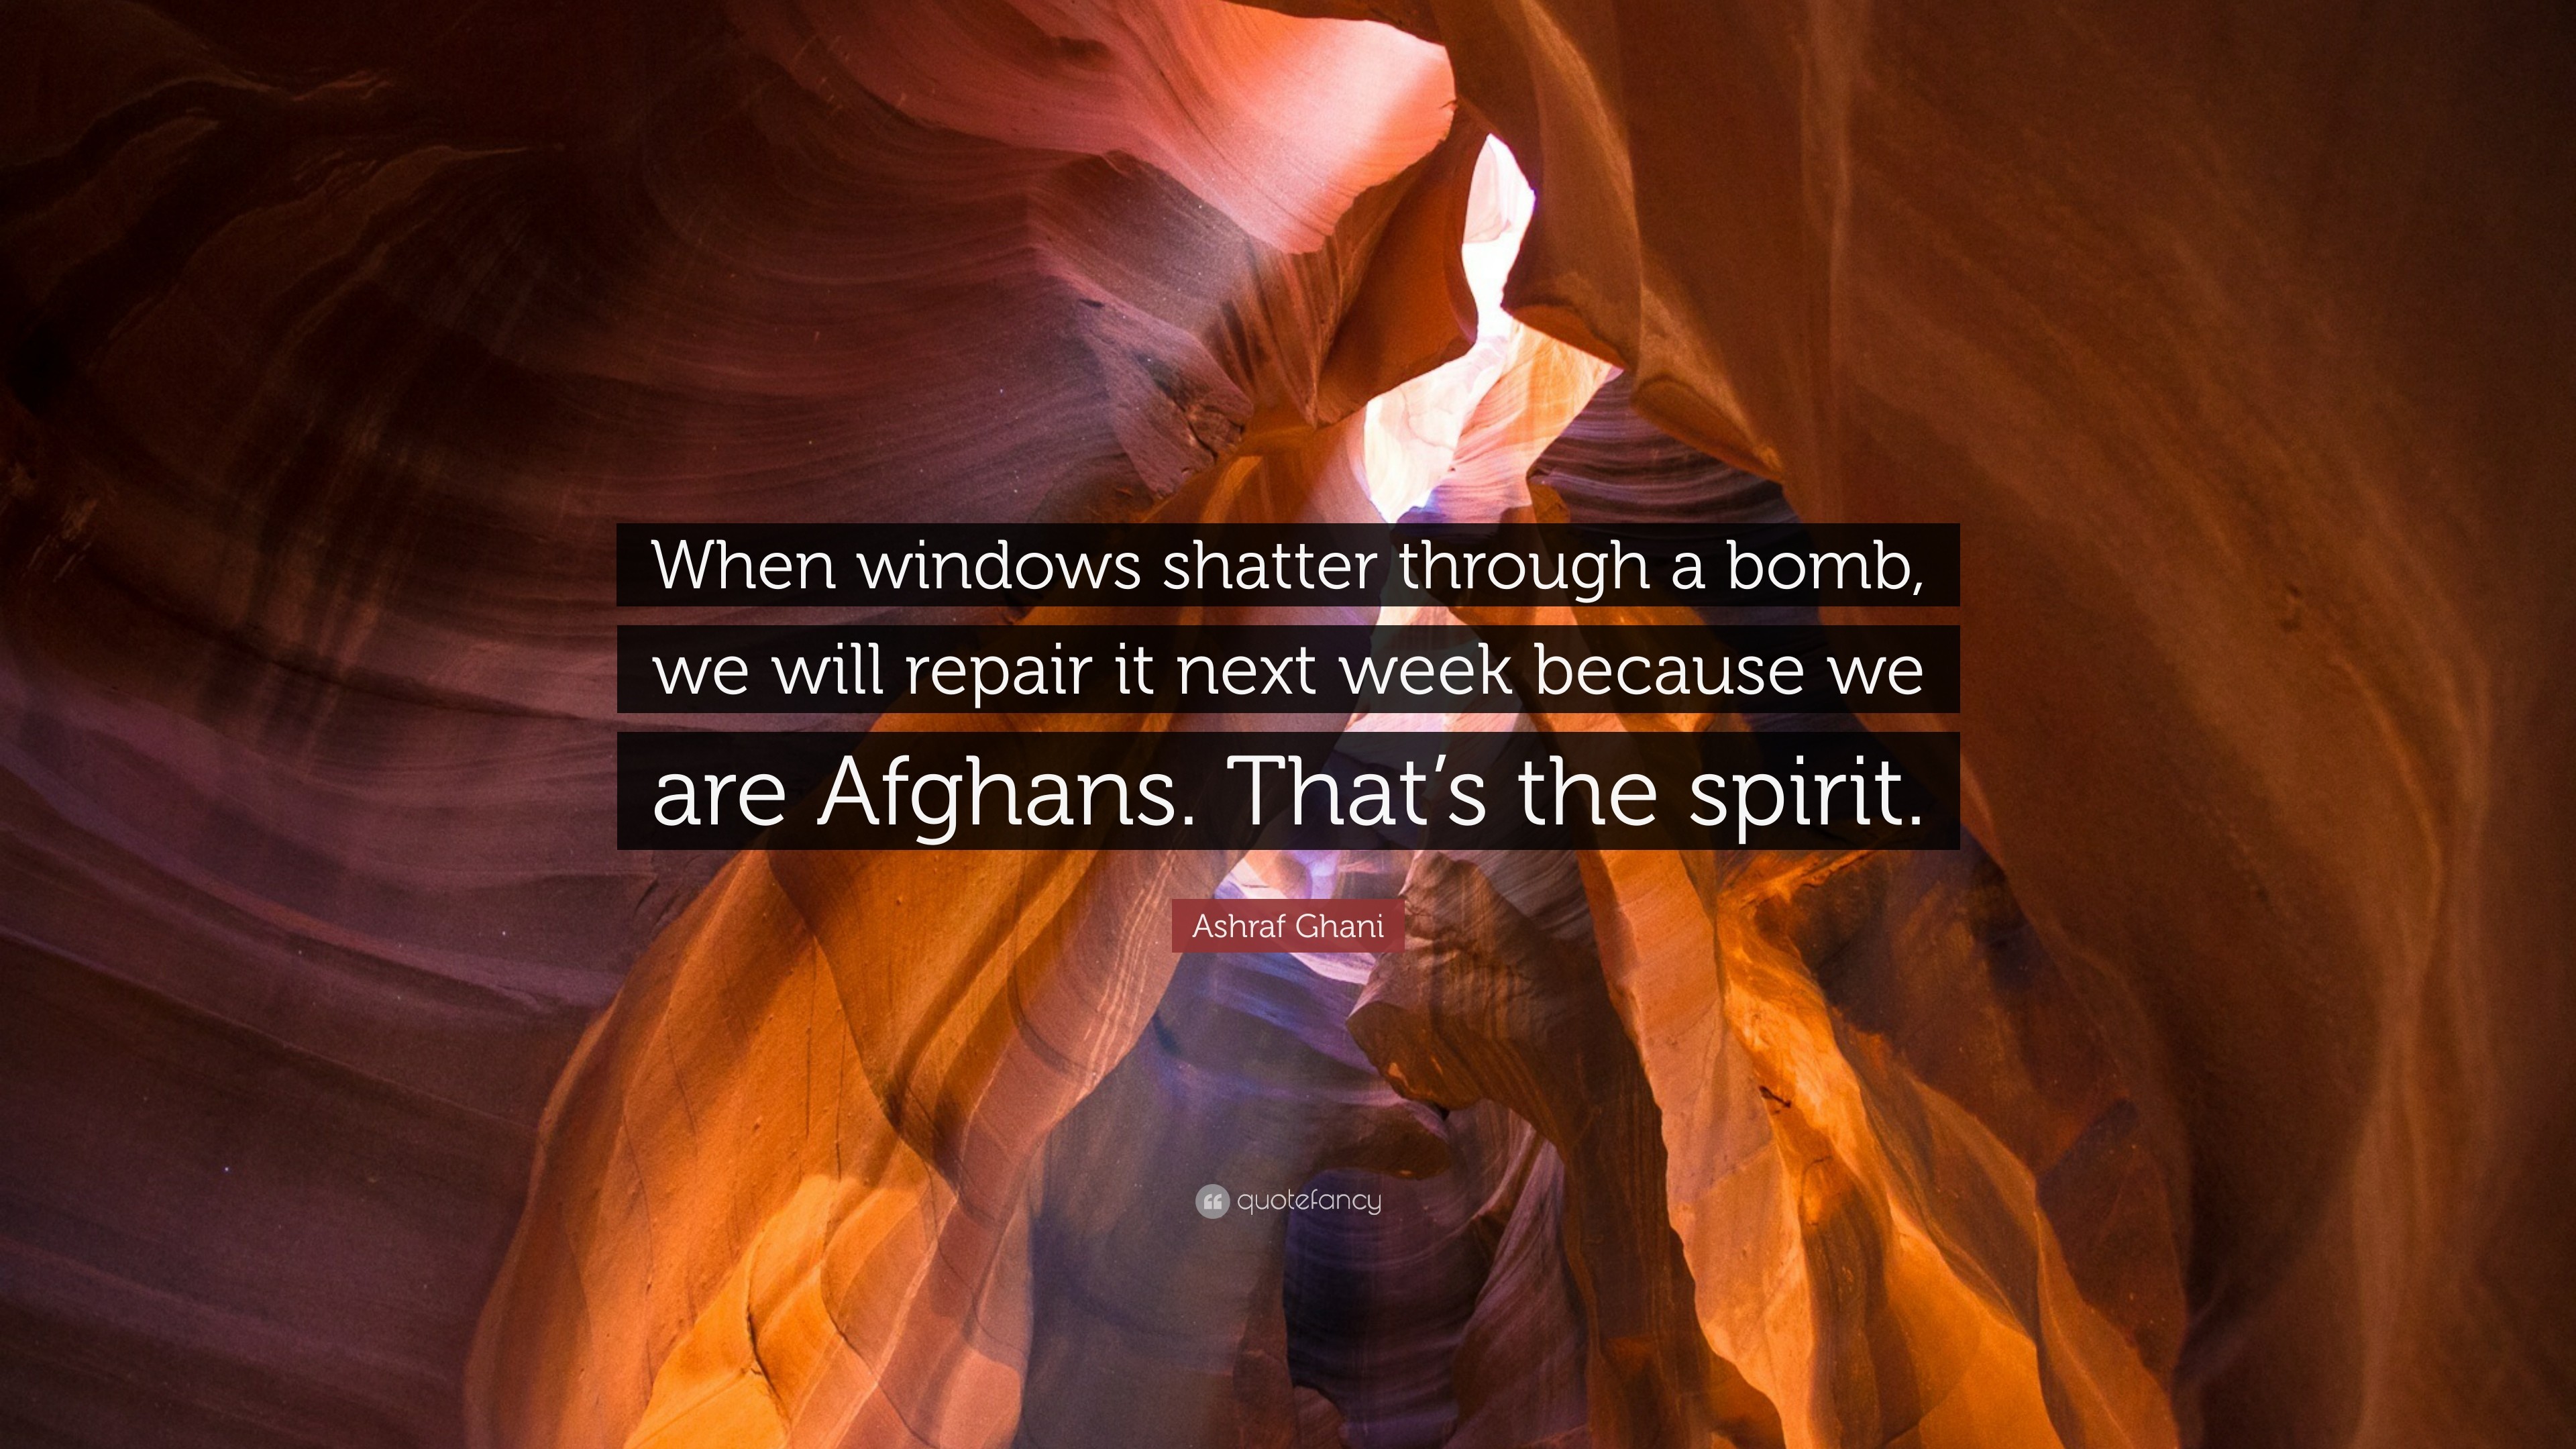 3840x2160 Ashraf Ghani Quote: “When windows shatter through a bomb, we will repair it